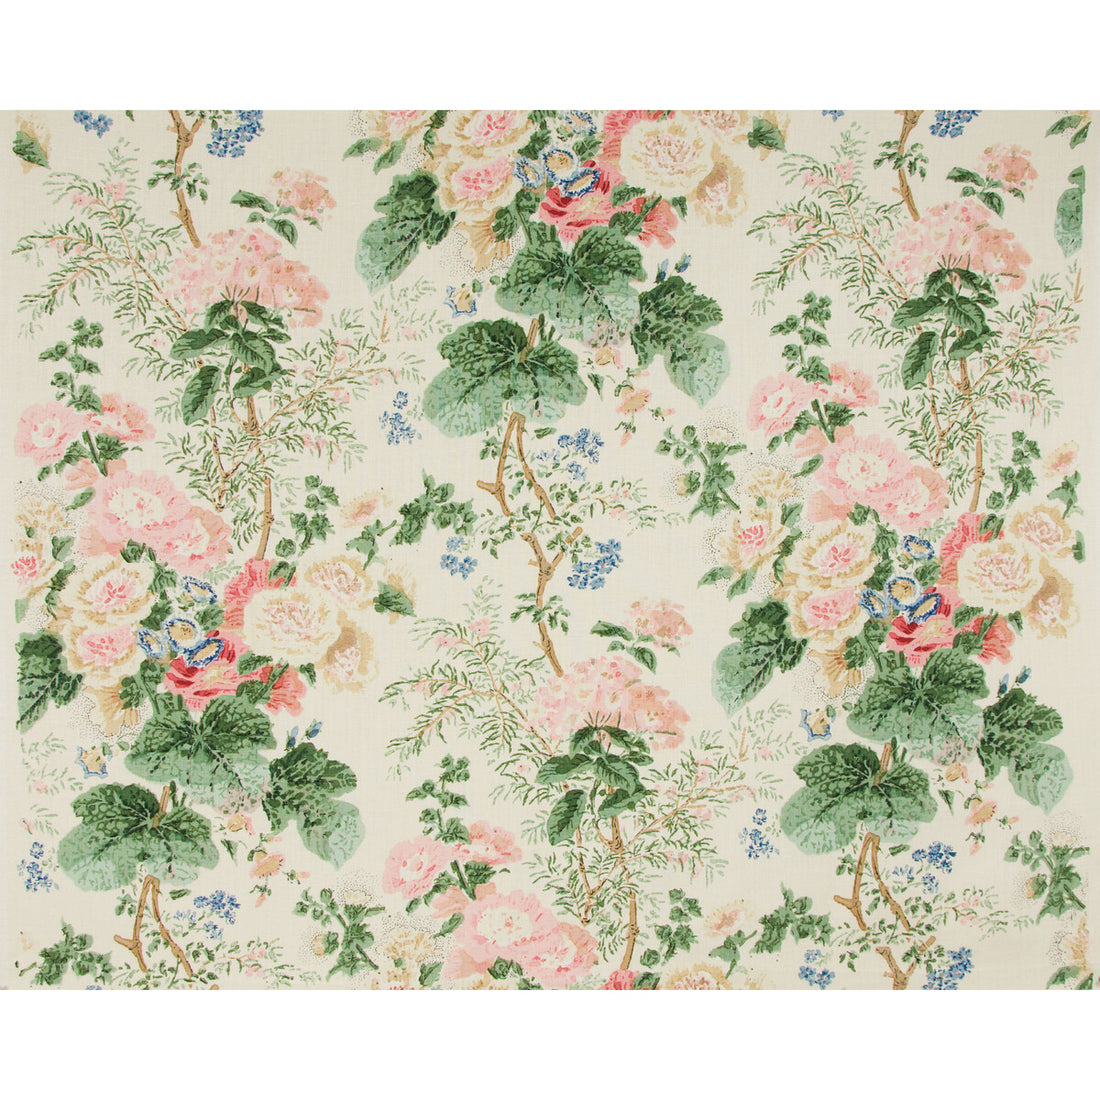 Hollyhock Hdb fabric in white/coral color - pattern 7129.LJ.0 - by Lee Jofa